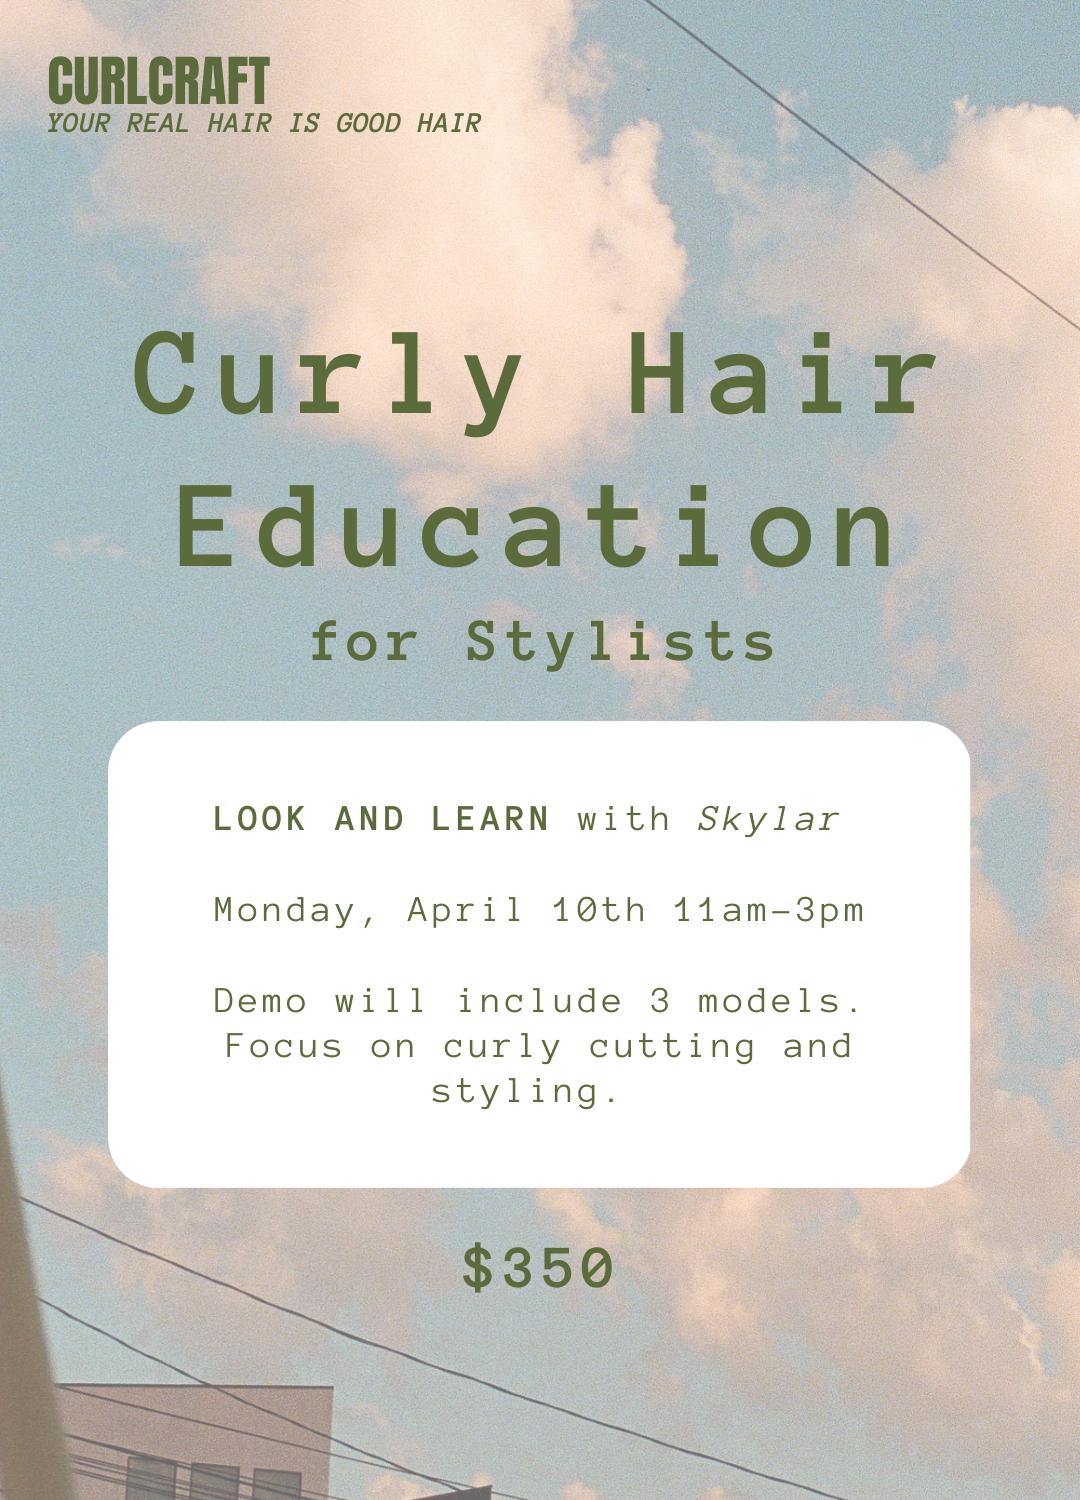 An event flyer for Curly Hair Education. For Stylists. Hosted at the CurlCraft Salon in North Park San Diego, CA. Flyer says: Look & learn with Skylar. Monday, April 10th 11am - 3pm. Demo will include 3 models. Focus on curly cutting and styling. Ticket price is $350.